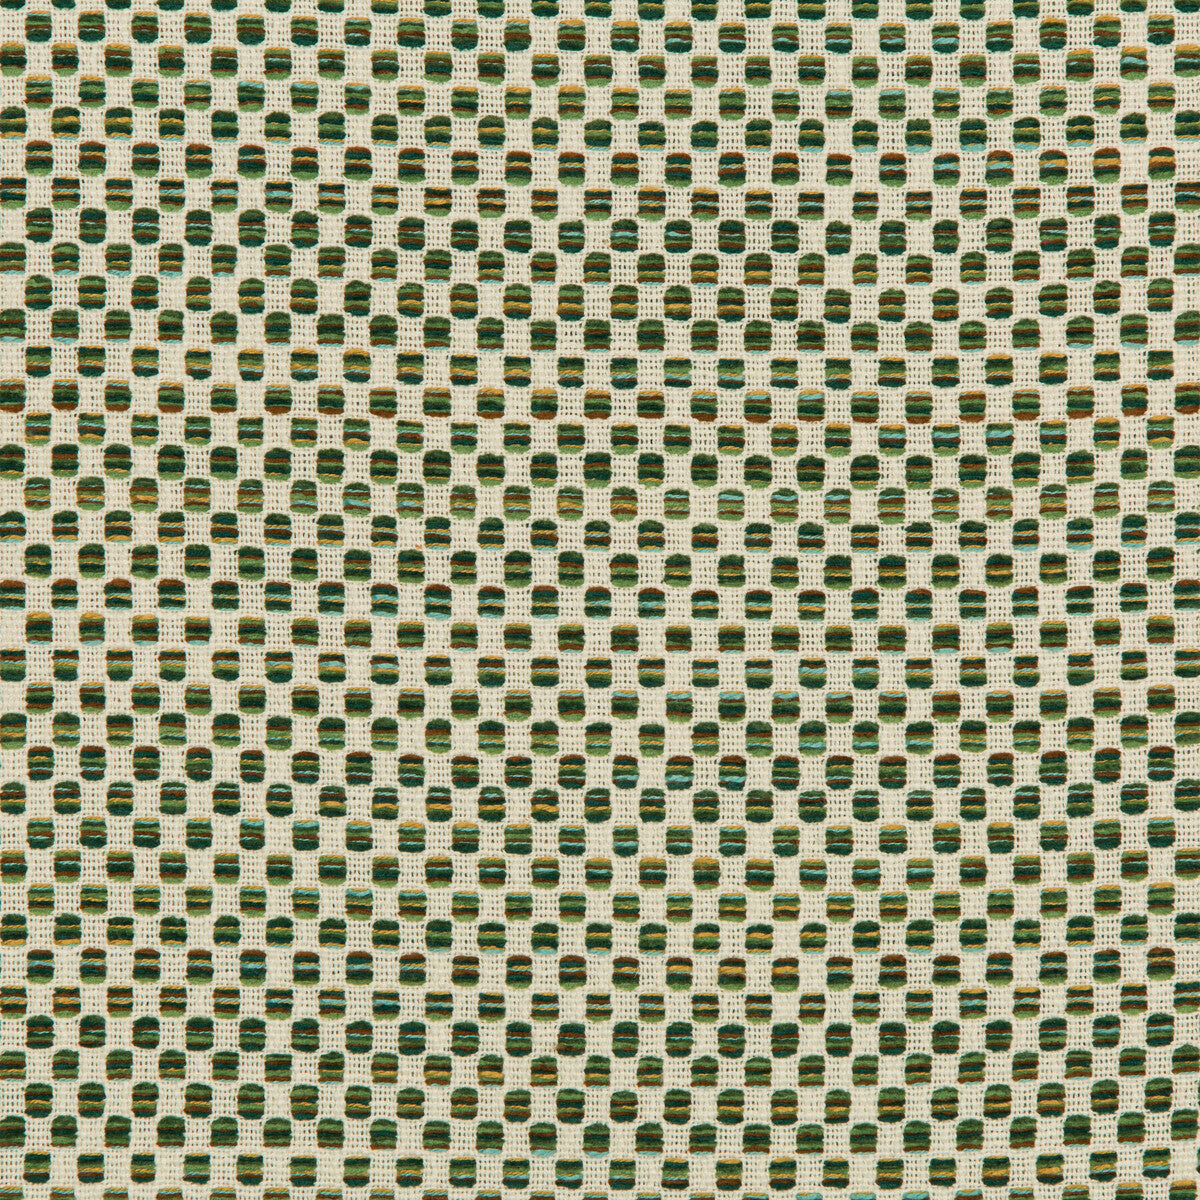 Kravet Design fabric in 36090-313 color - pattern 36090.313.0 - by Kravet Design in the Inside Out Performance Fabrics collection